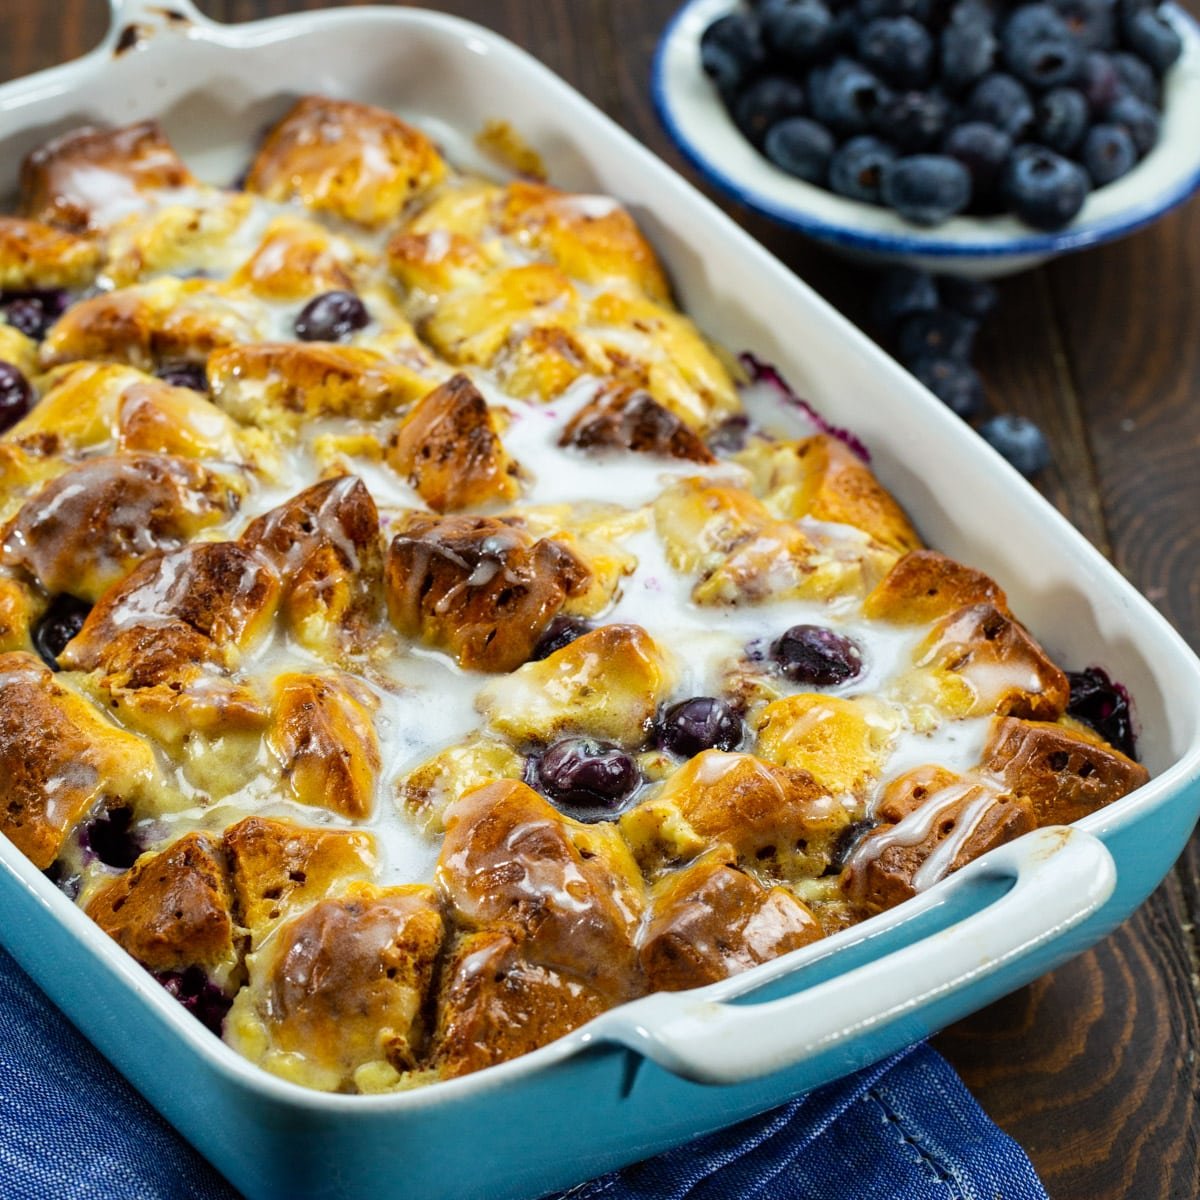 Blueberry Cinnamon Roll Bake in a baking dish.